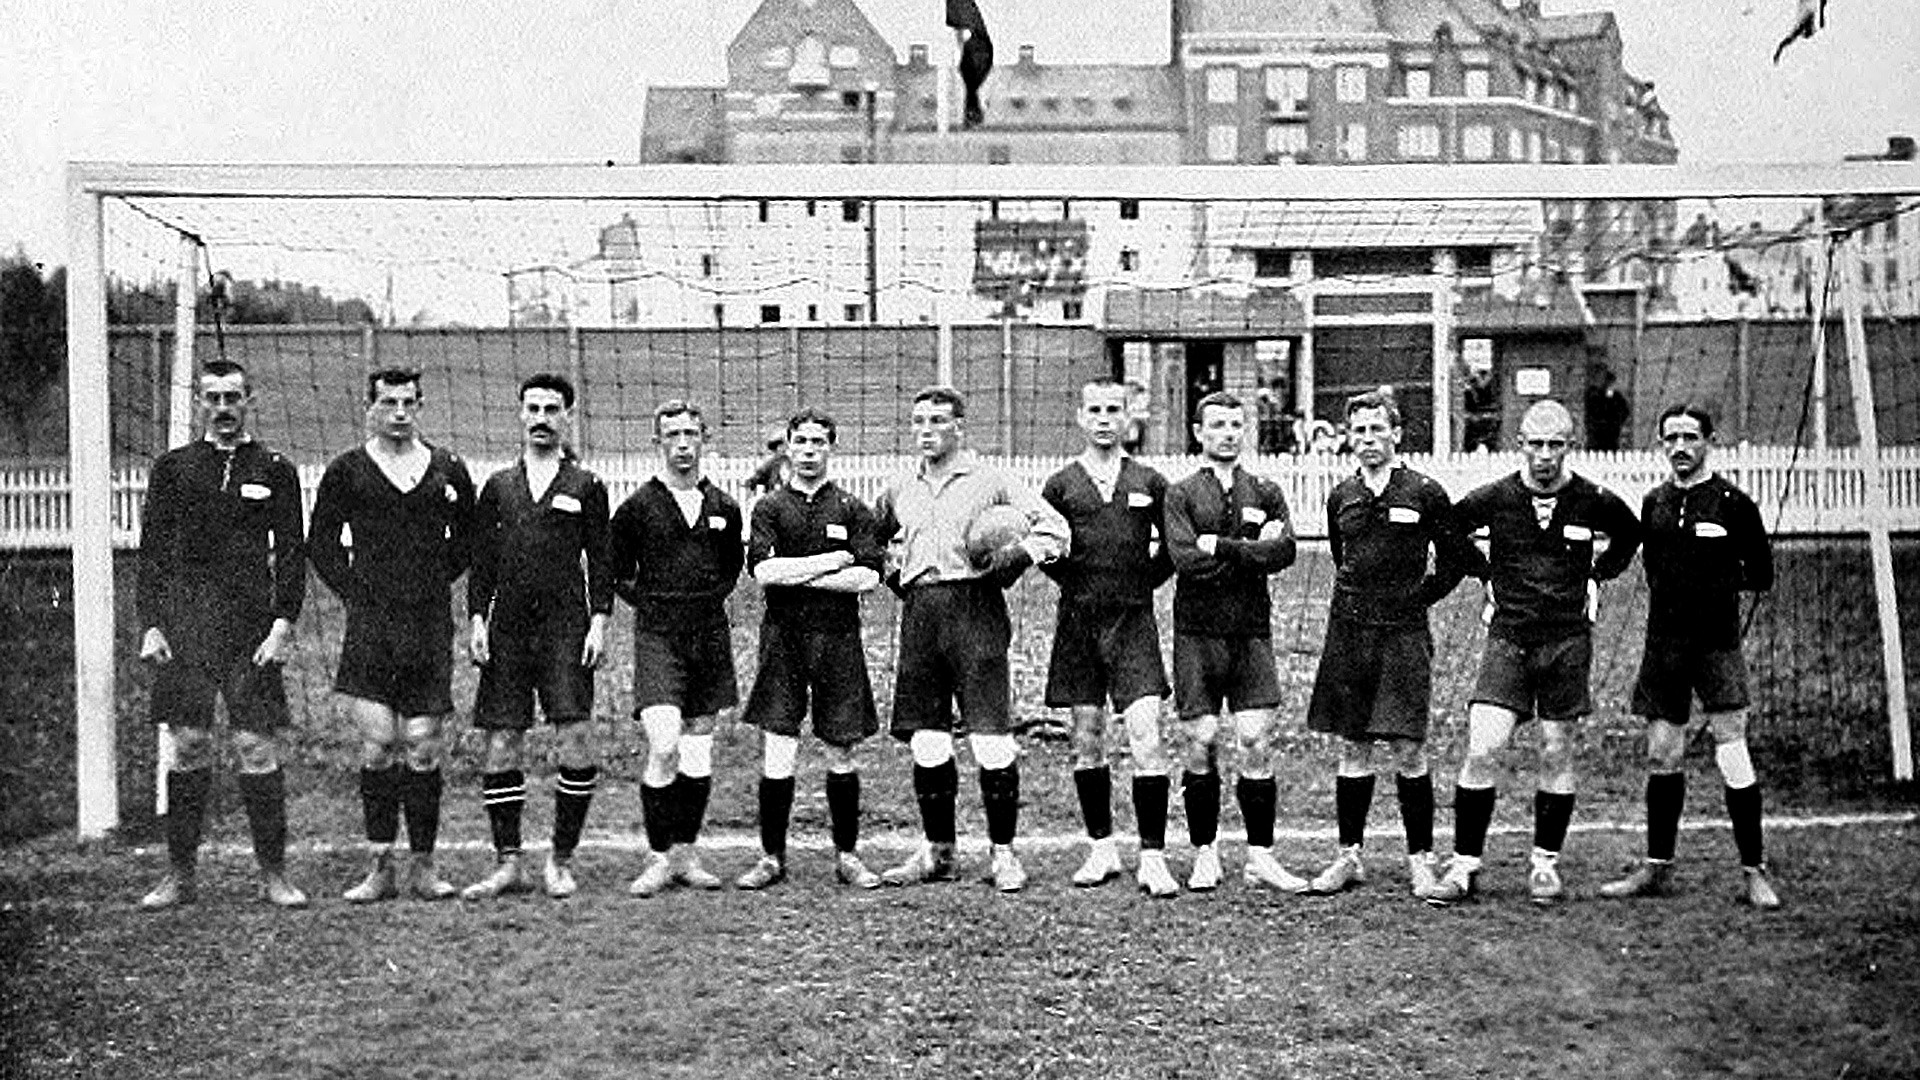 The Russian Empire national team at the 1912 Olympics.